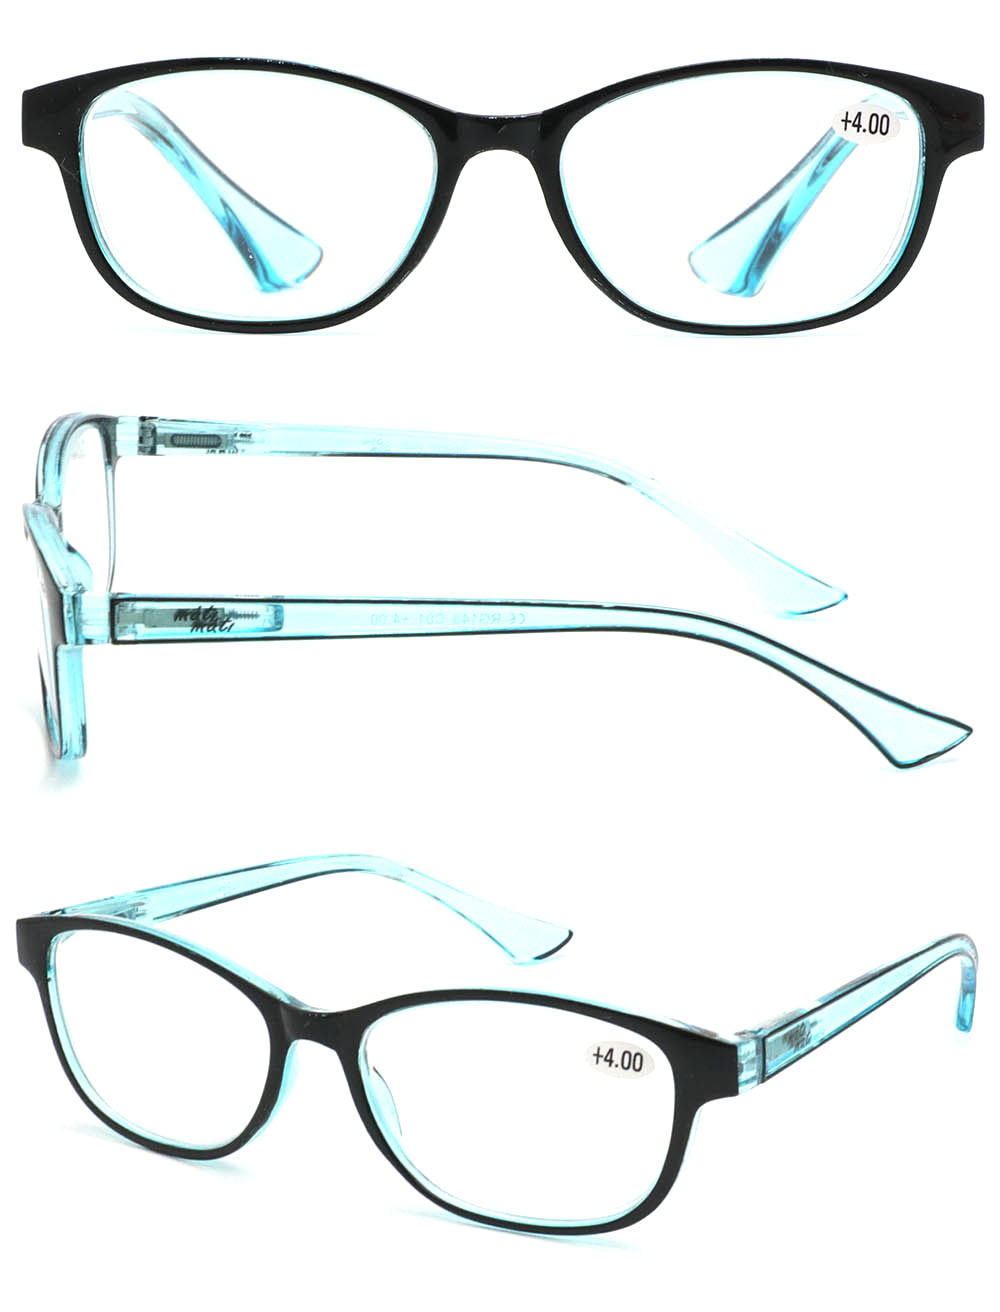  reading glasses with metal spring hinge